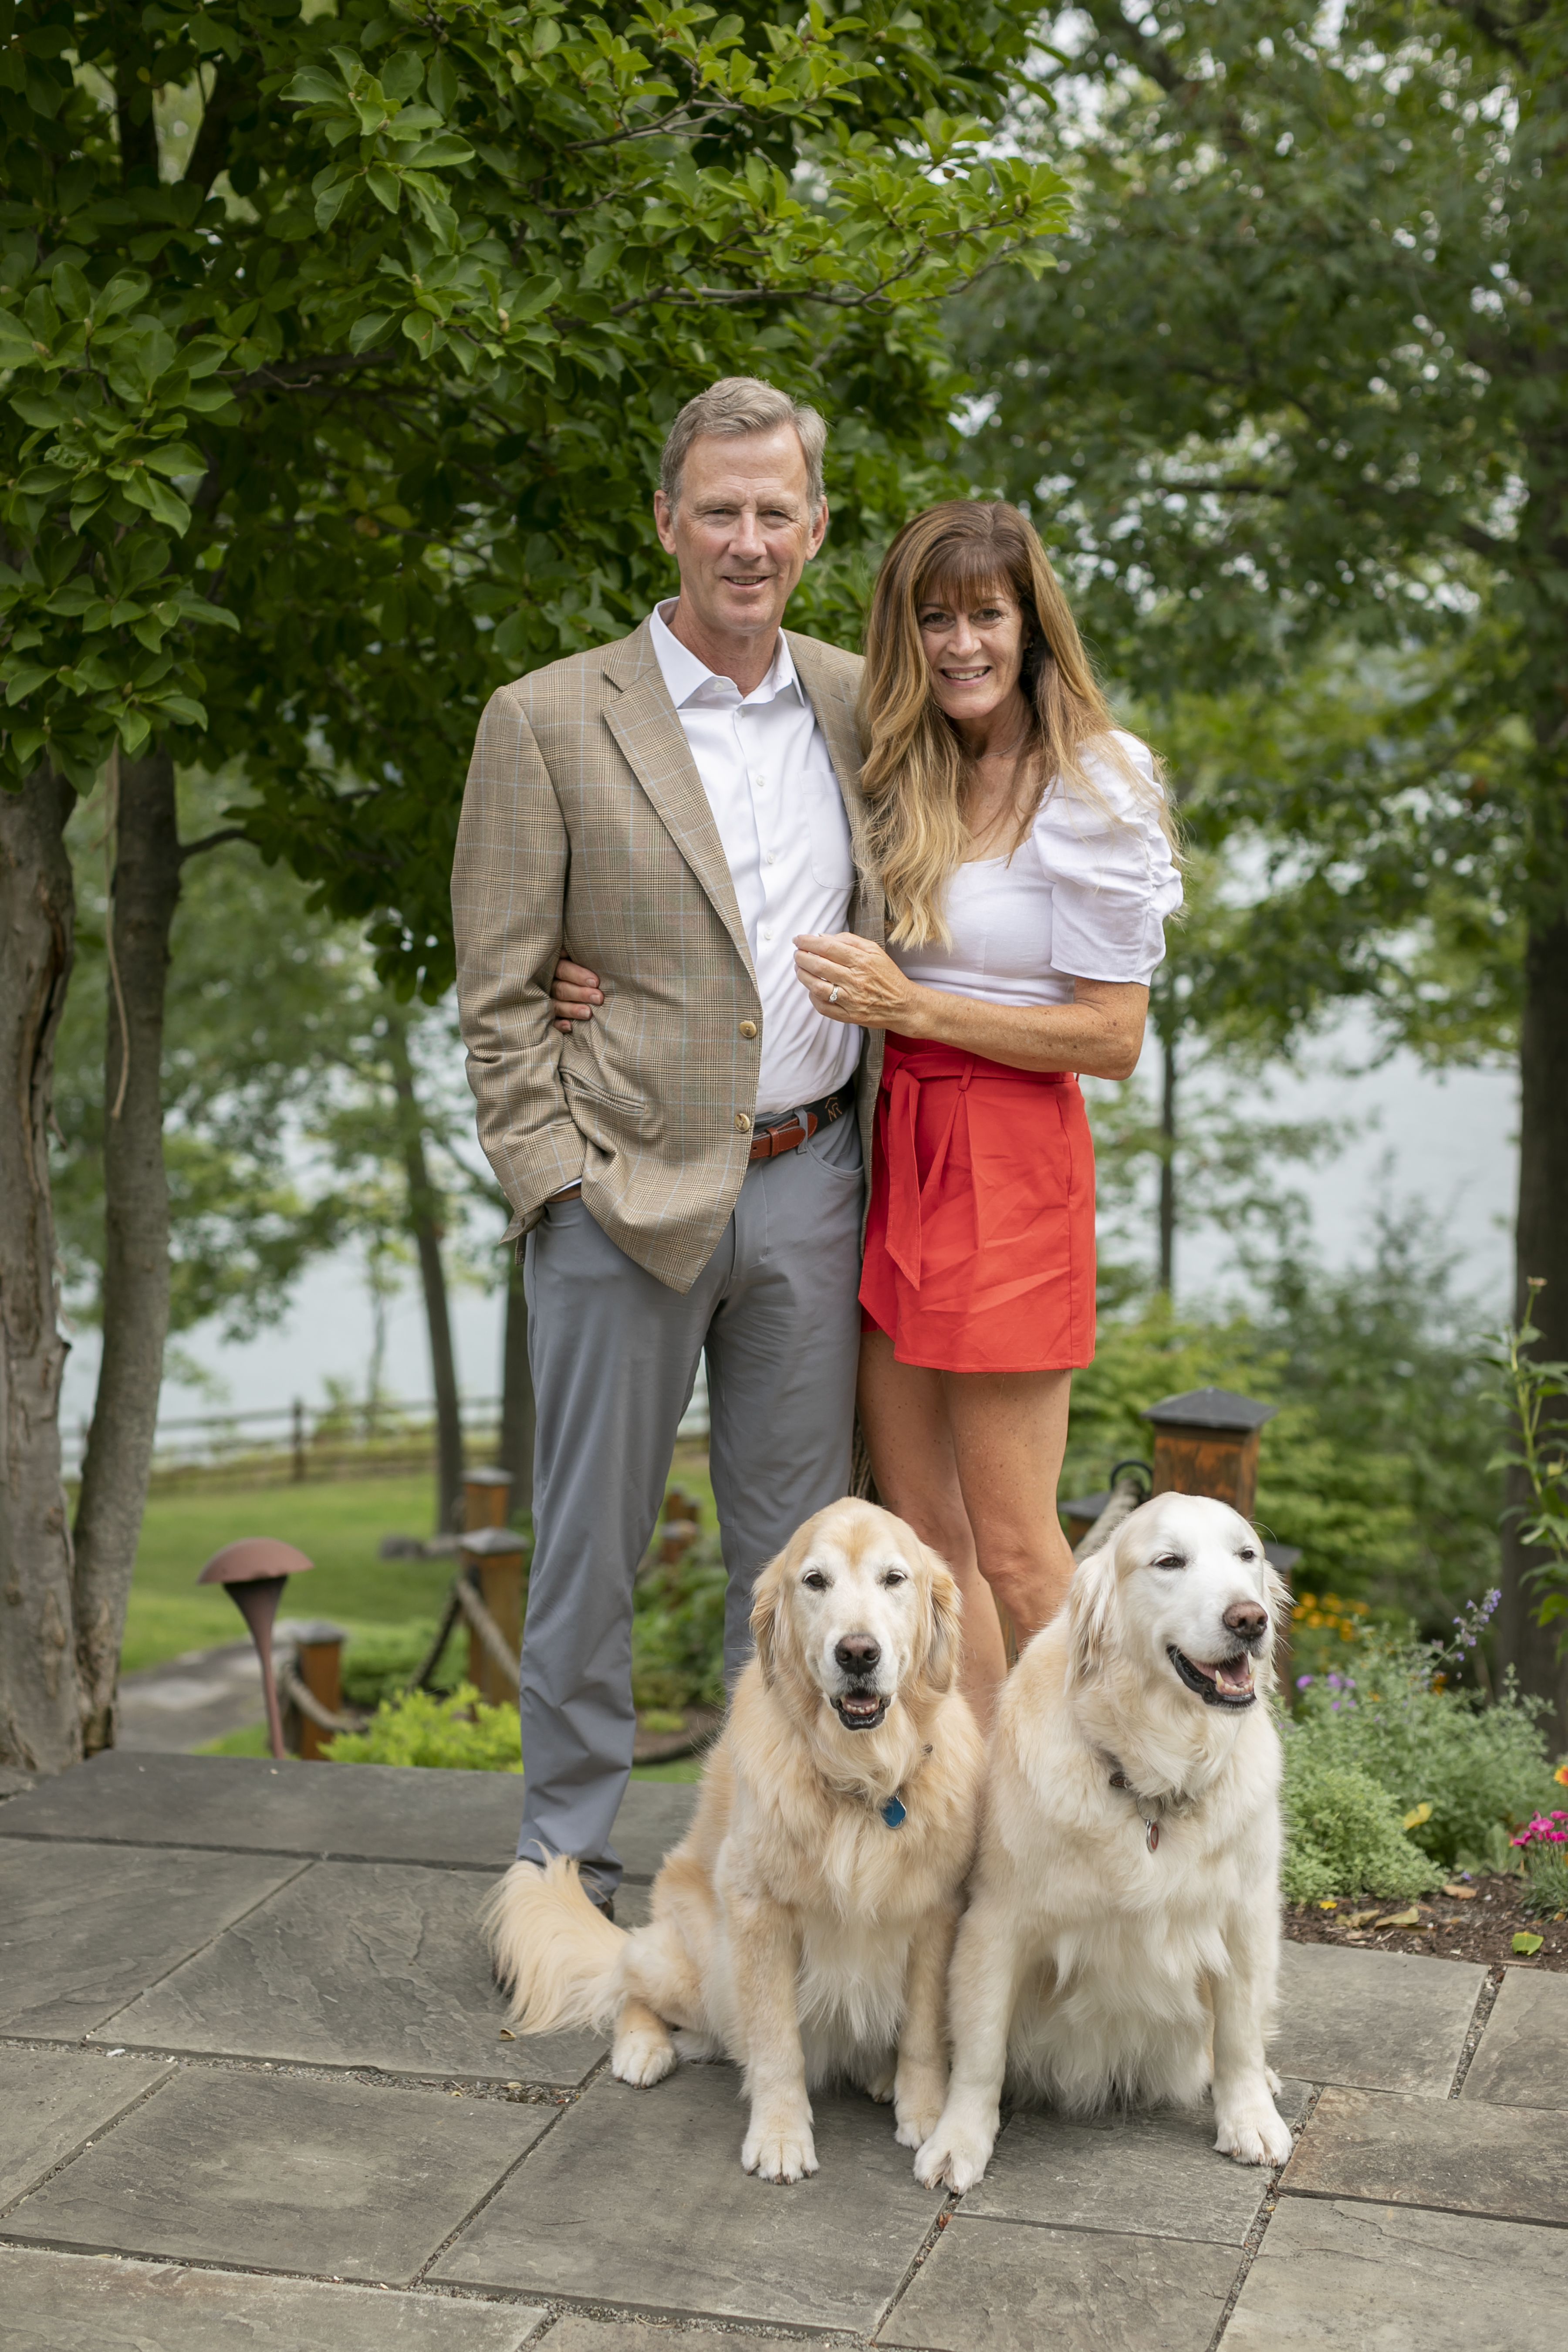 Peter and Stephanie Nolan standing outside their home with their two dogs Maci and Bailey at their feet.